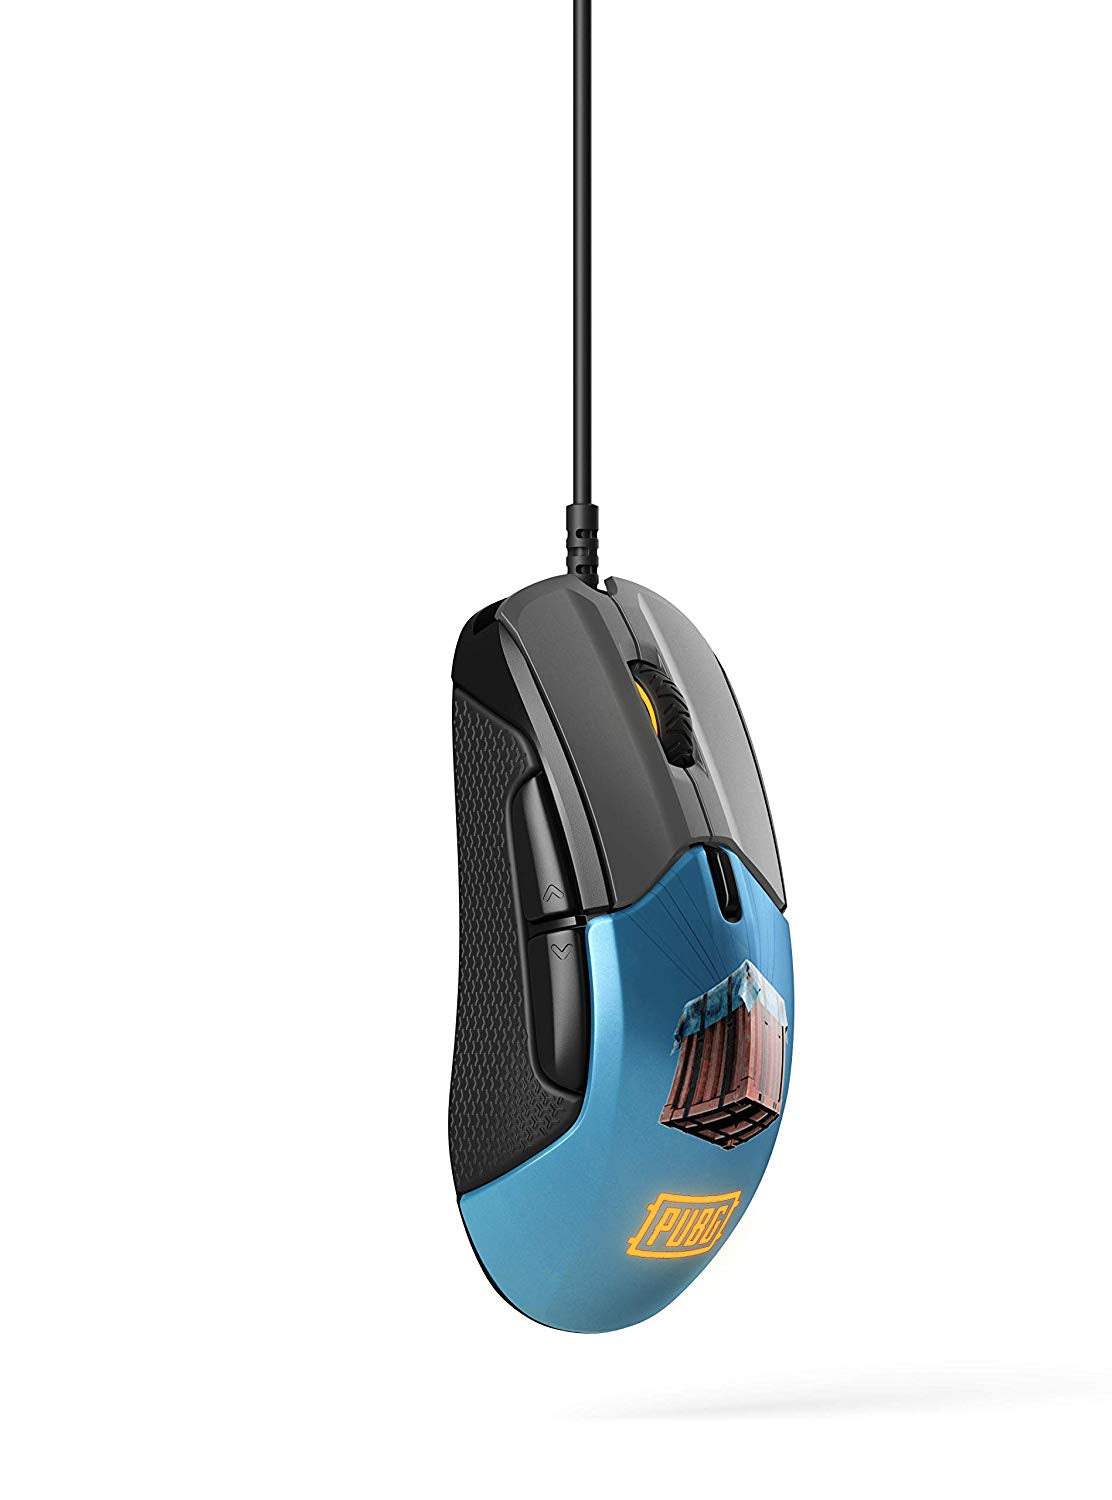 MOUSE STEELSERIES GAMING RIVAL 310 PUBG 12000Dpi